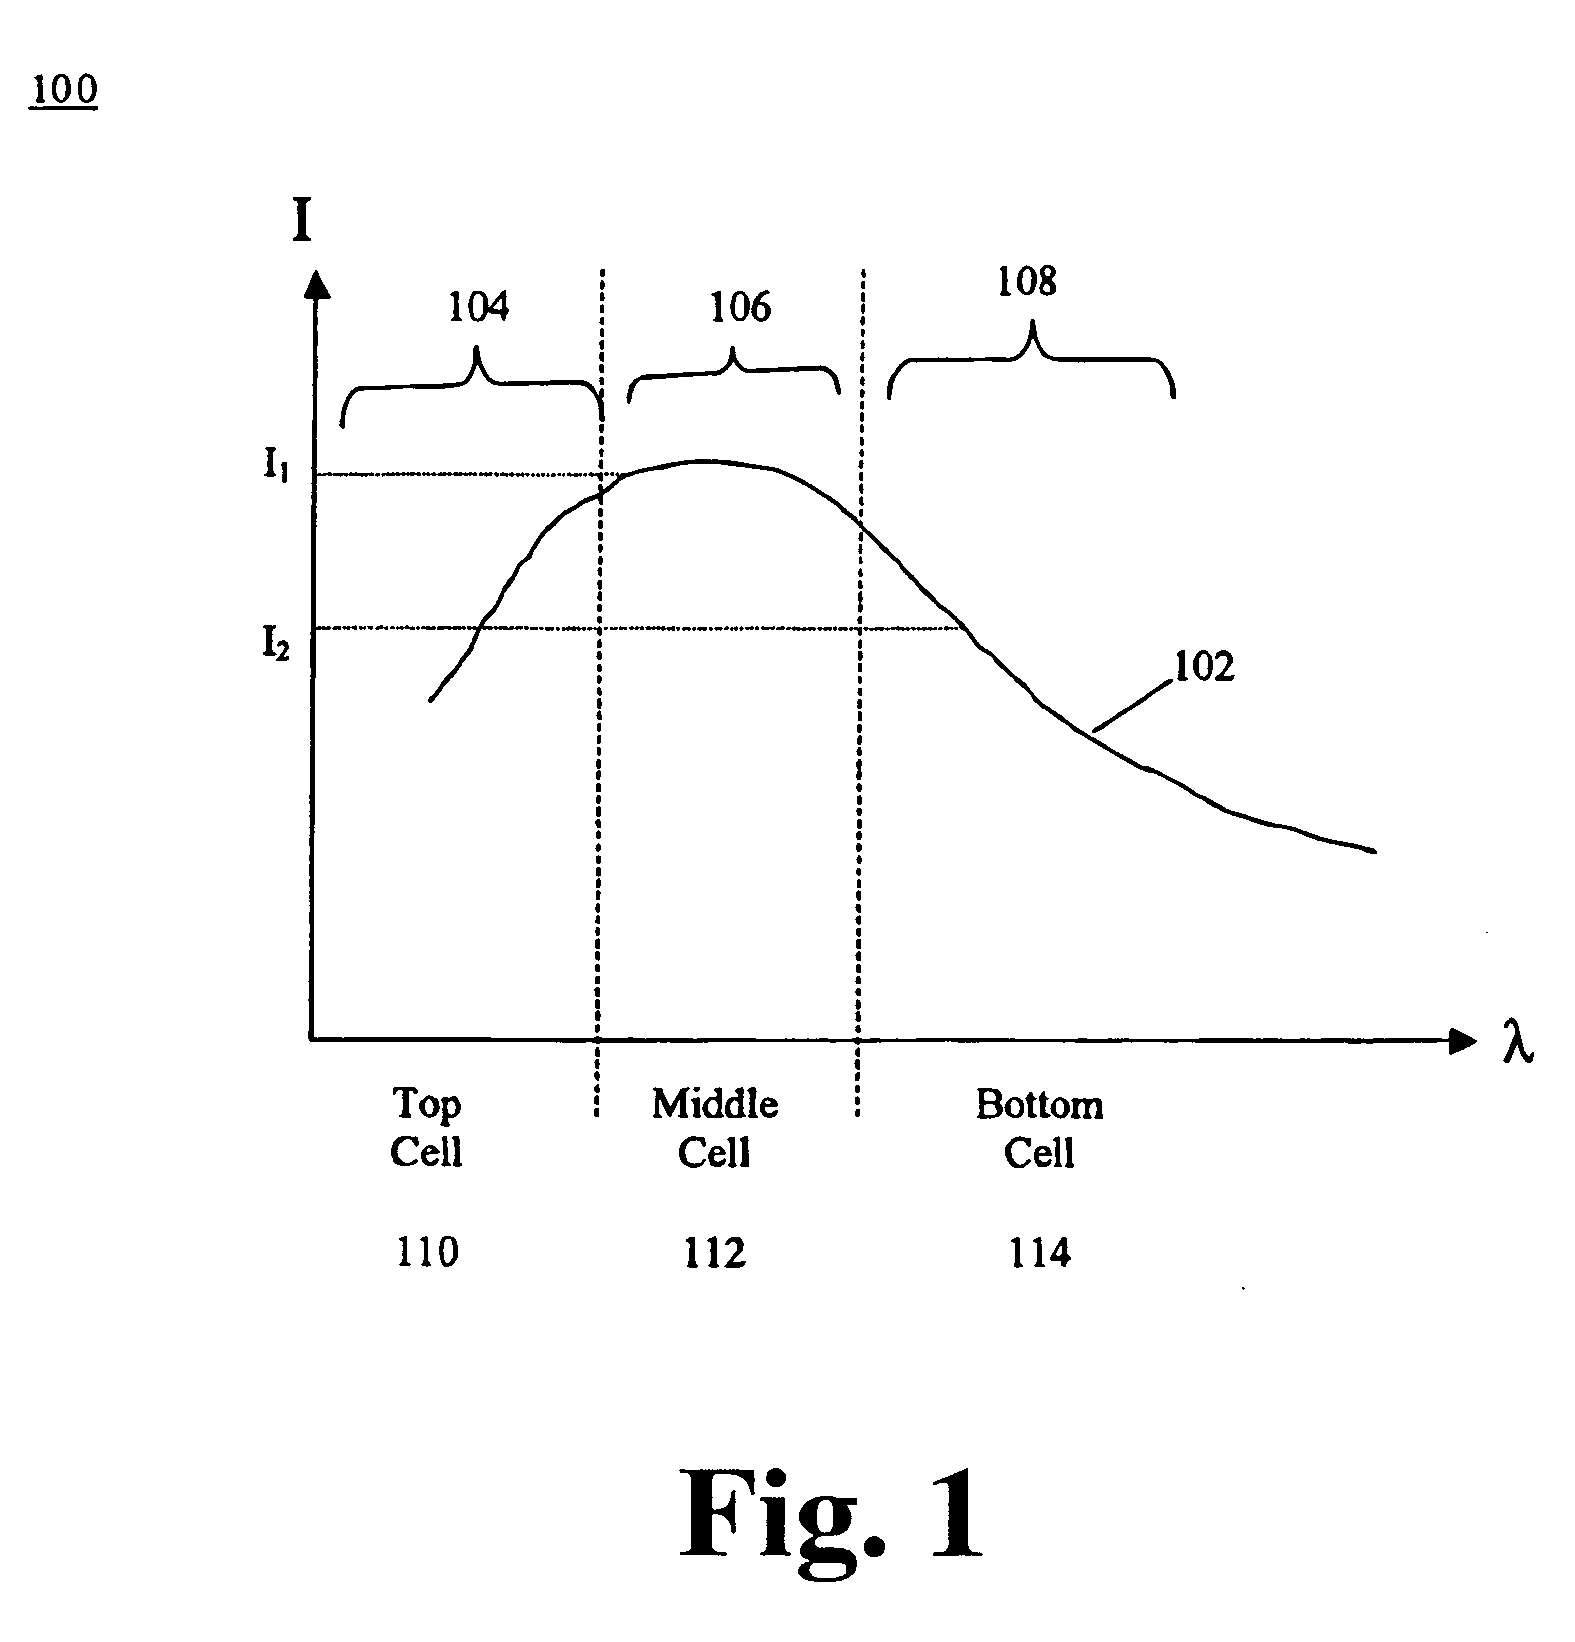 Method and apparatus of multiplejunction solar cell structure with high band gap heterojunction middle cell